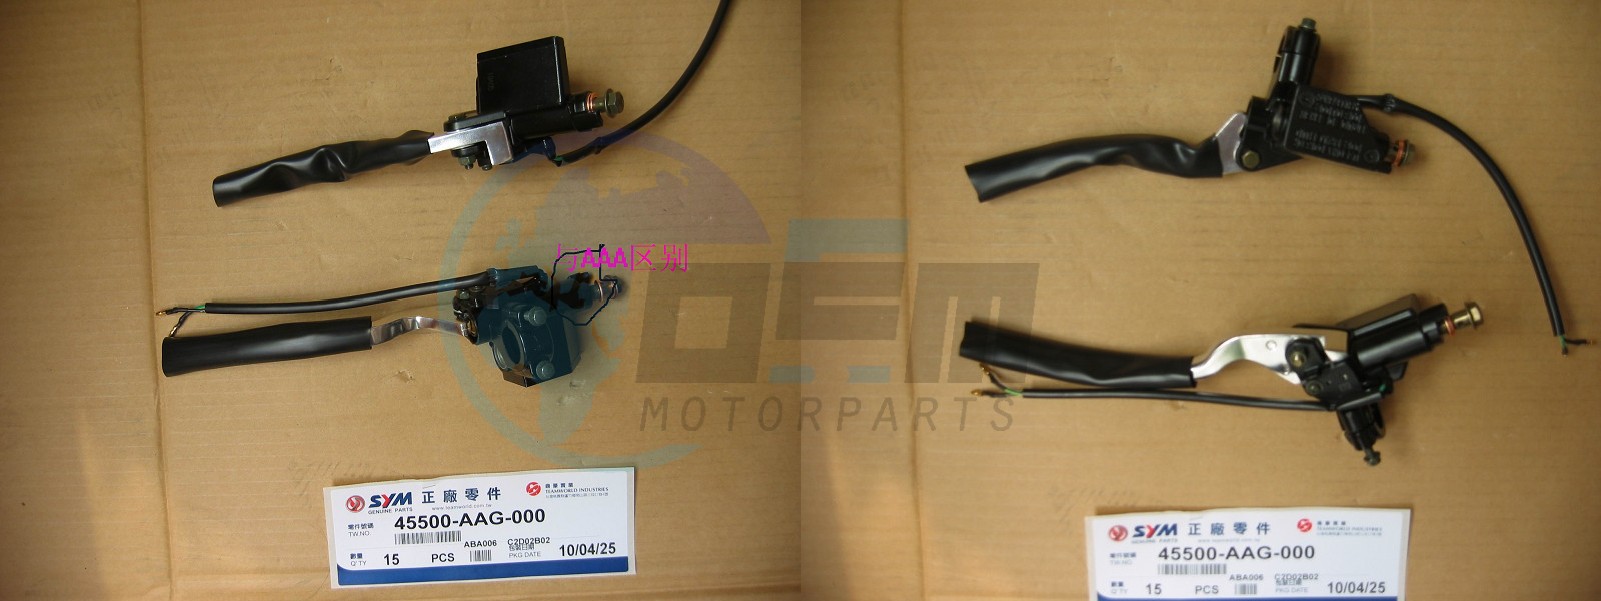 Product image: Sym - 45500-AAA-000 - FR M C ASS'Y  0